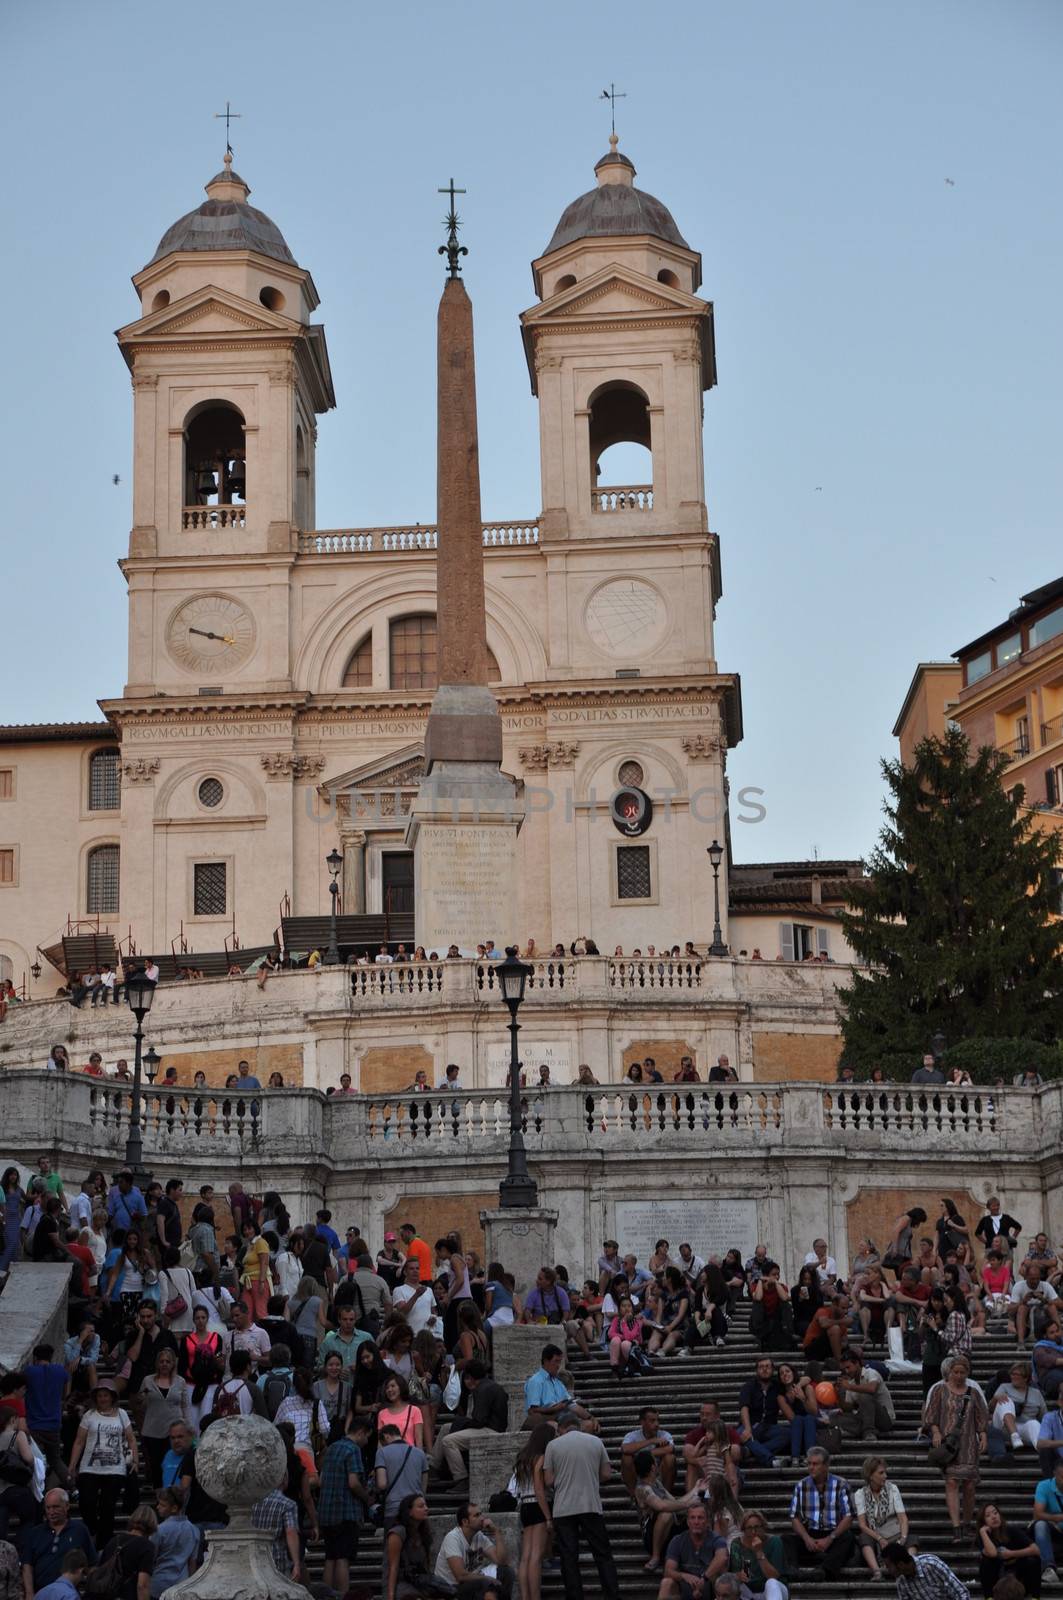 ROME - SEPTEMBER 20: People sitting on the Spanish Steps in Rome